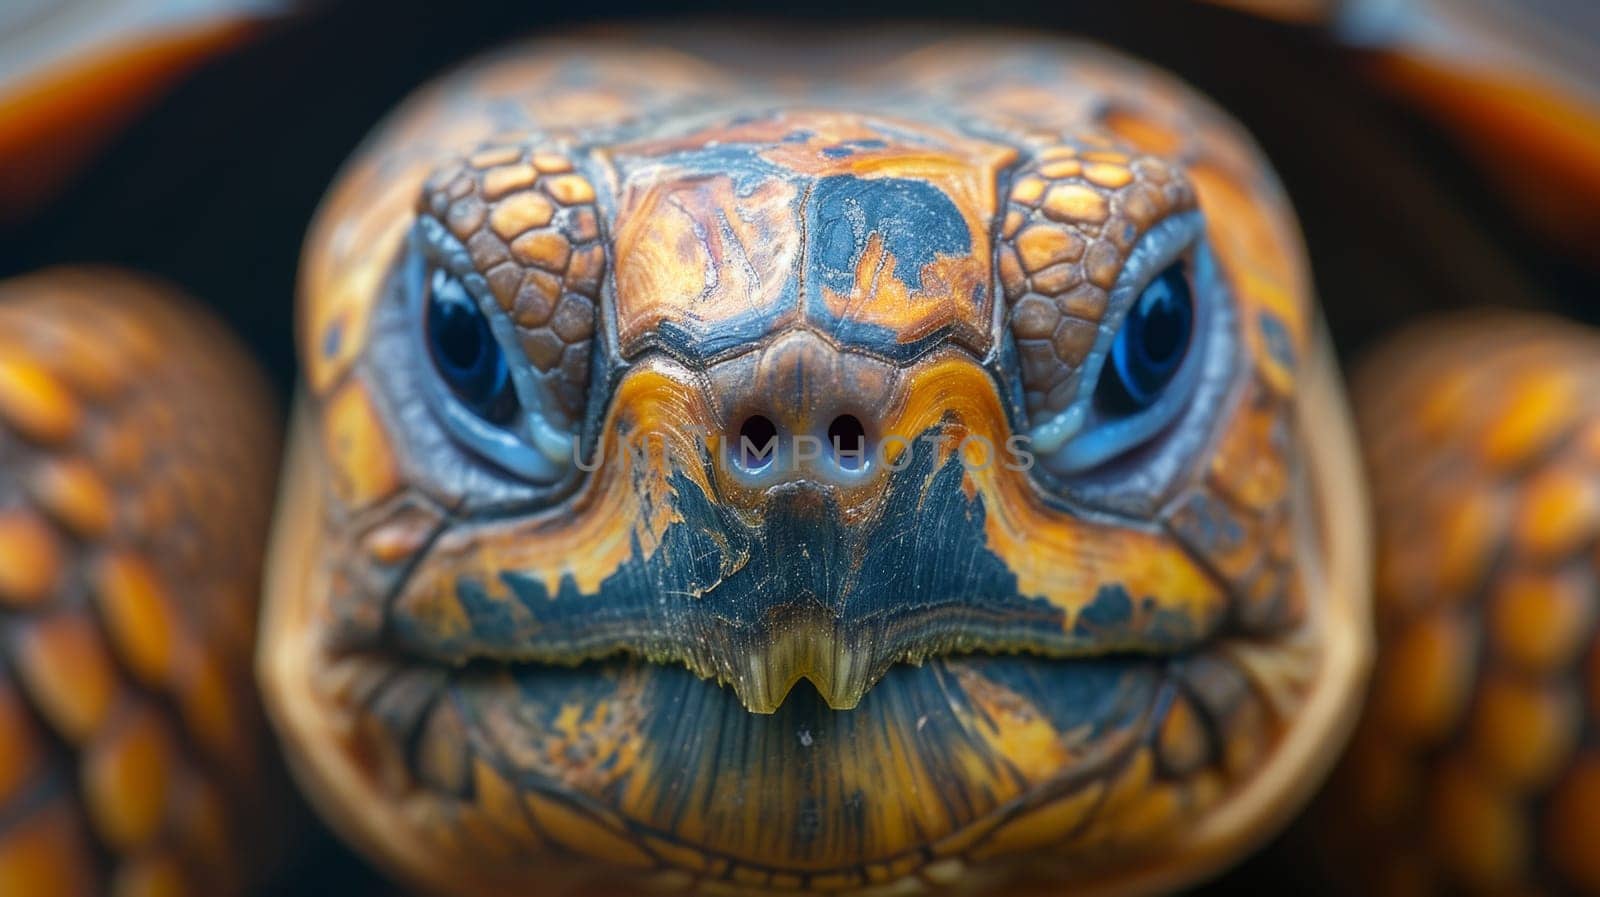 A close up of a turtle's face with blue eyes